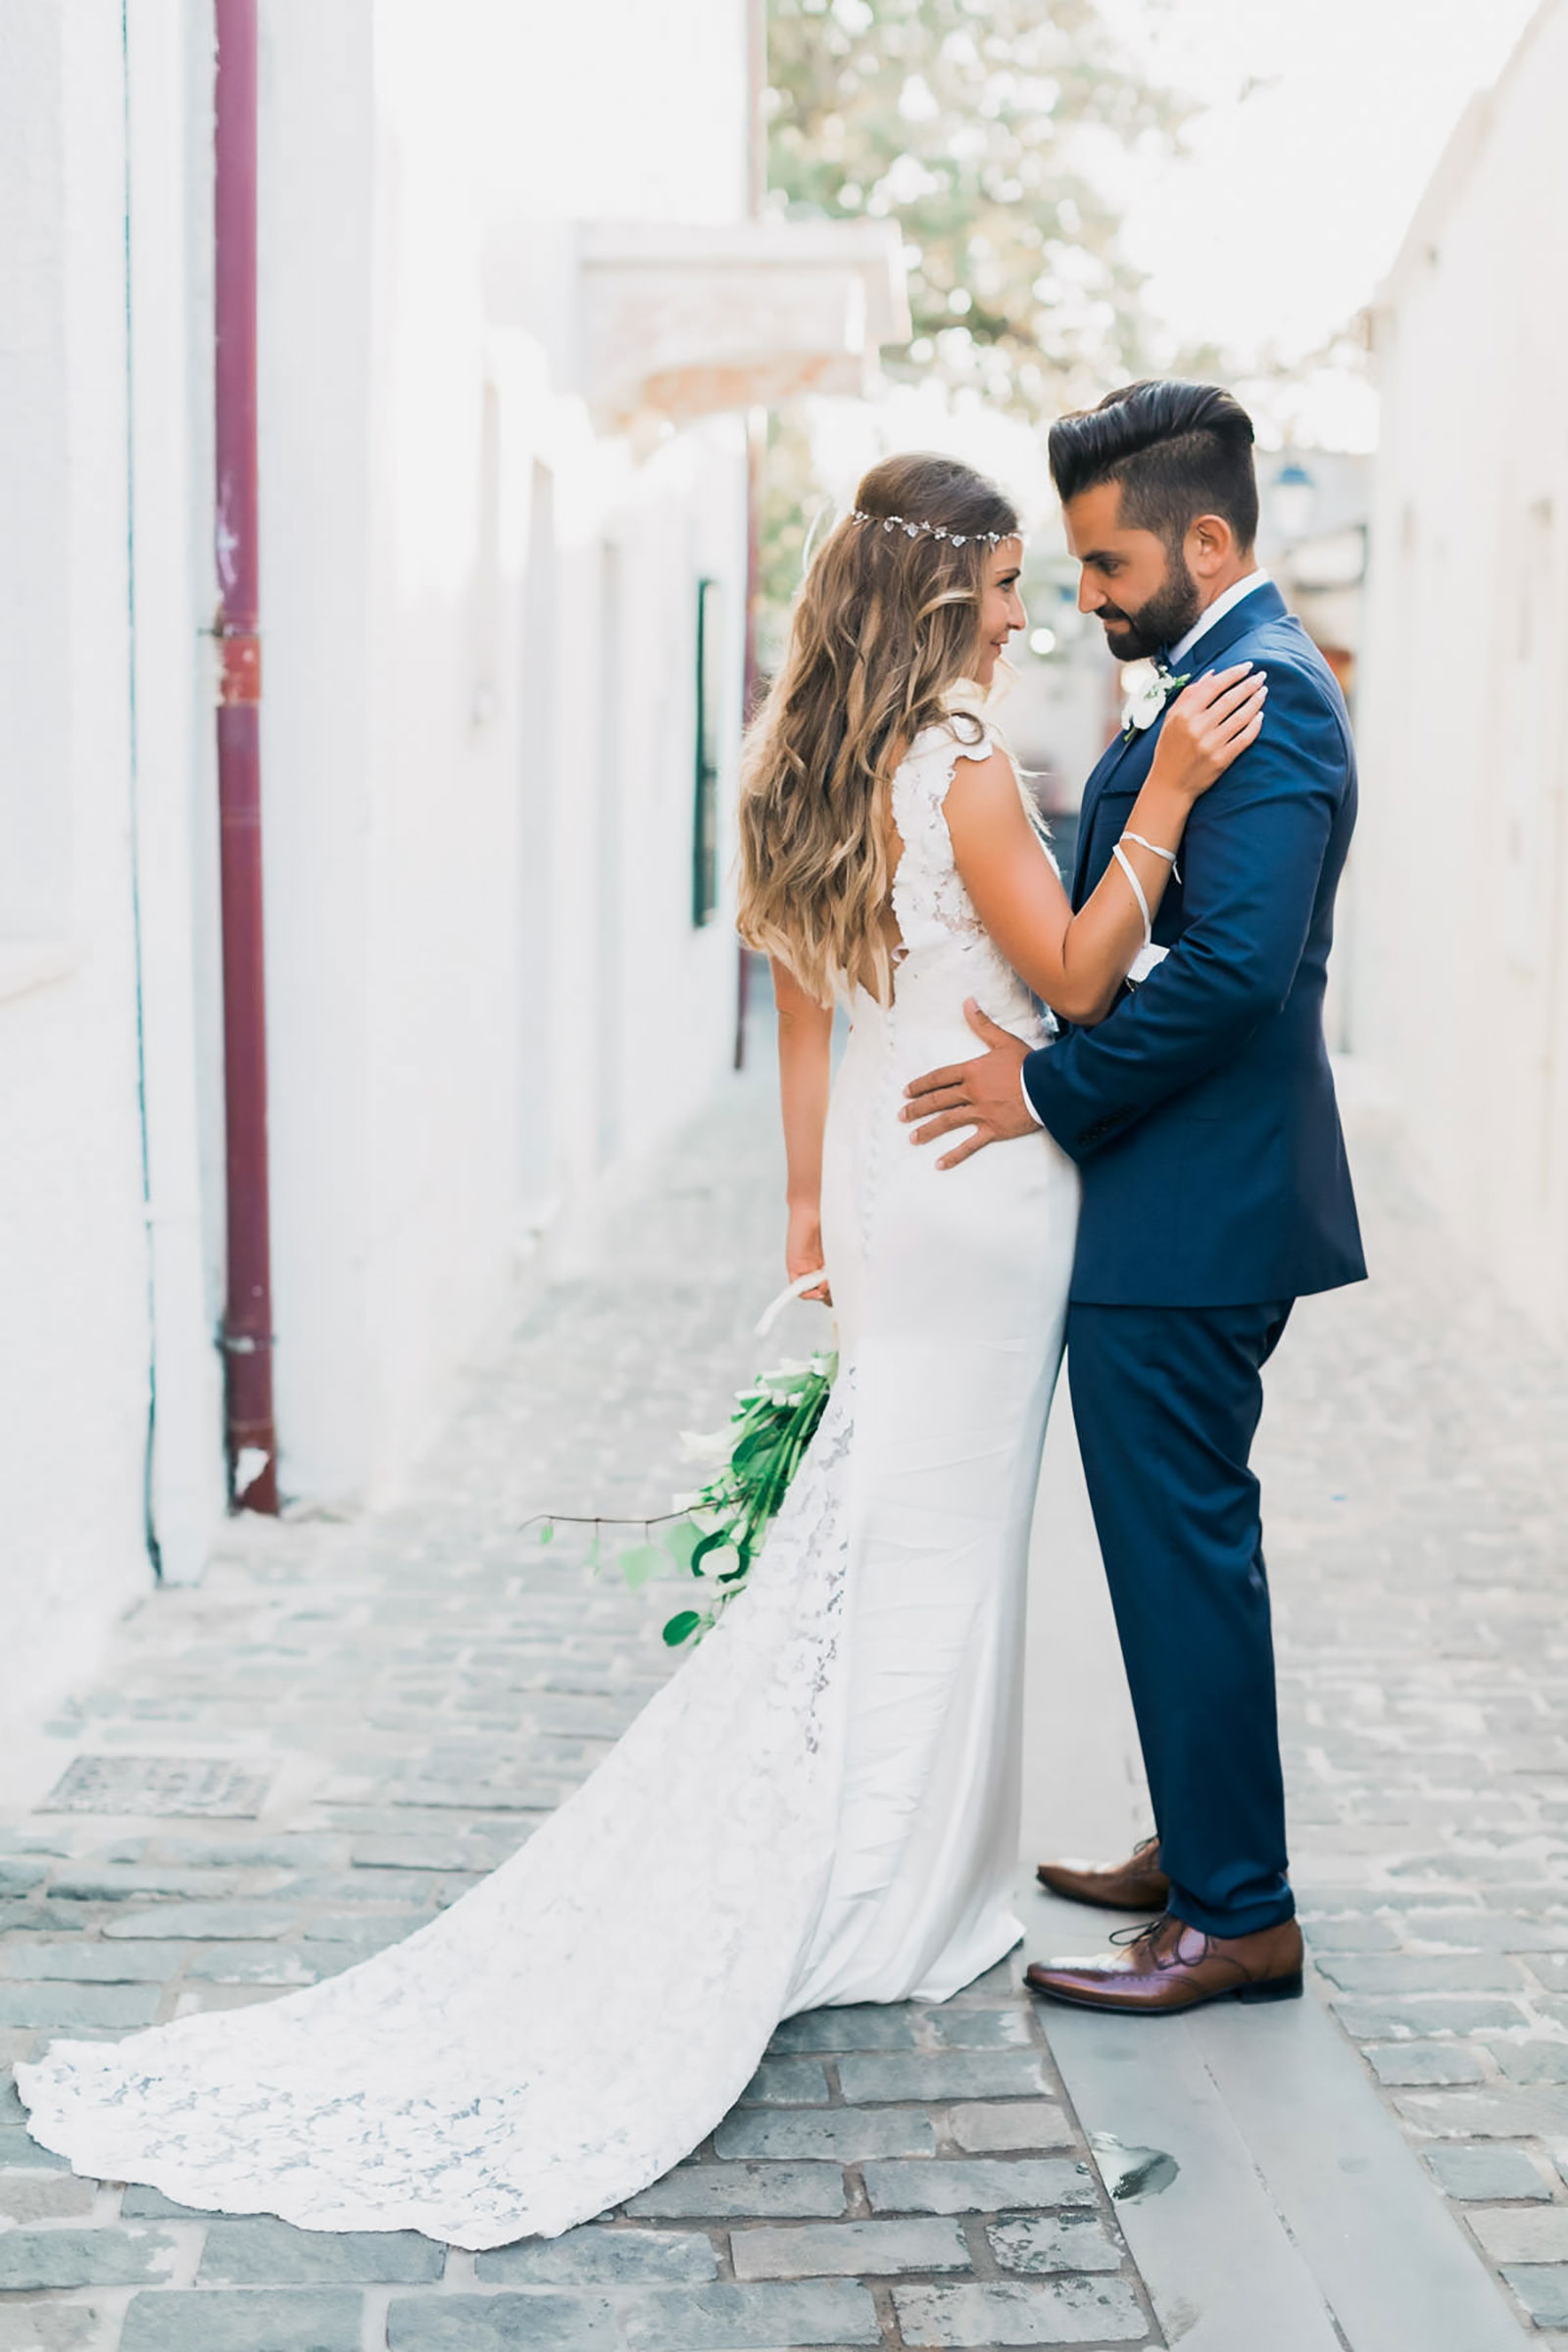 How to plan your wedding in Crete in 10 steps